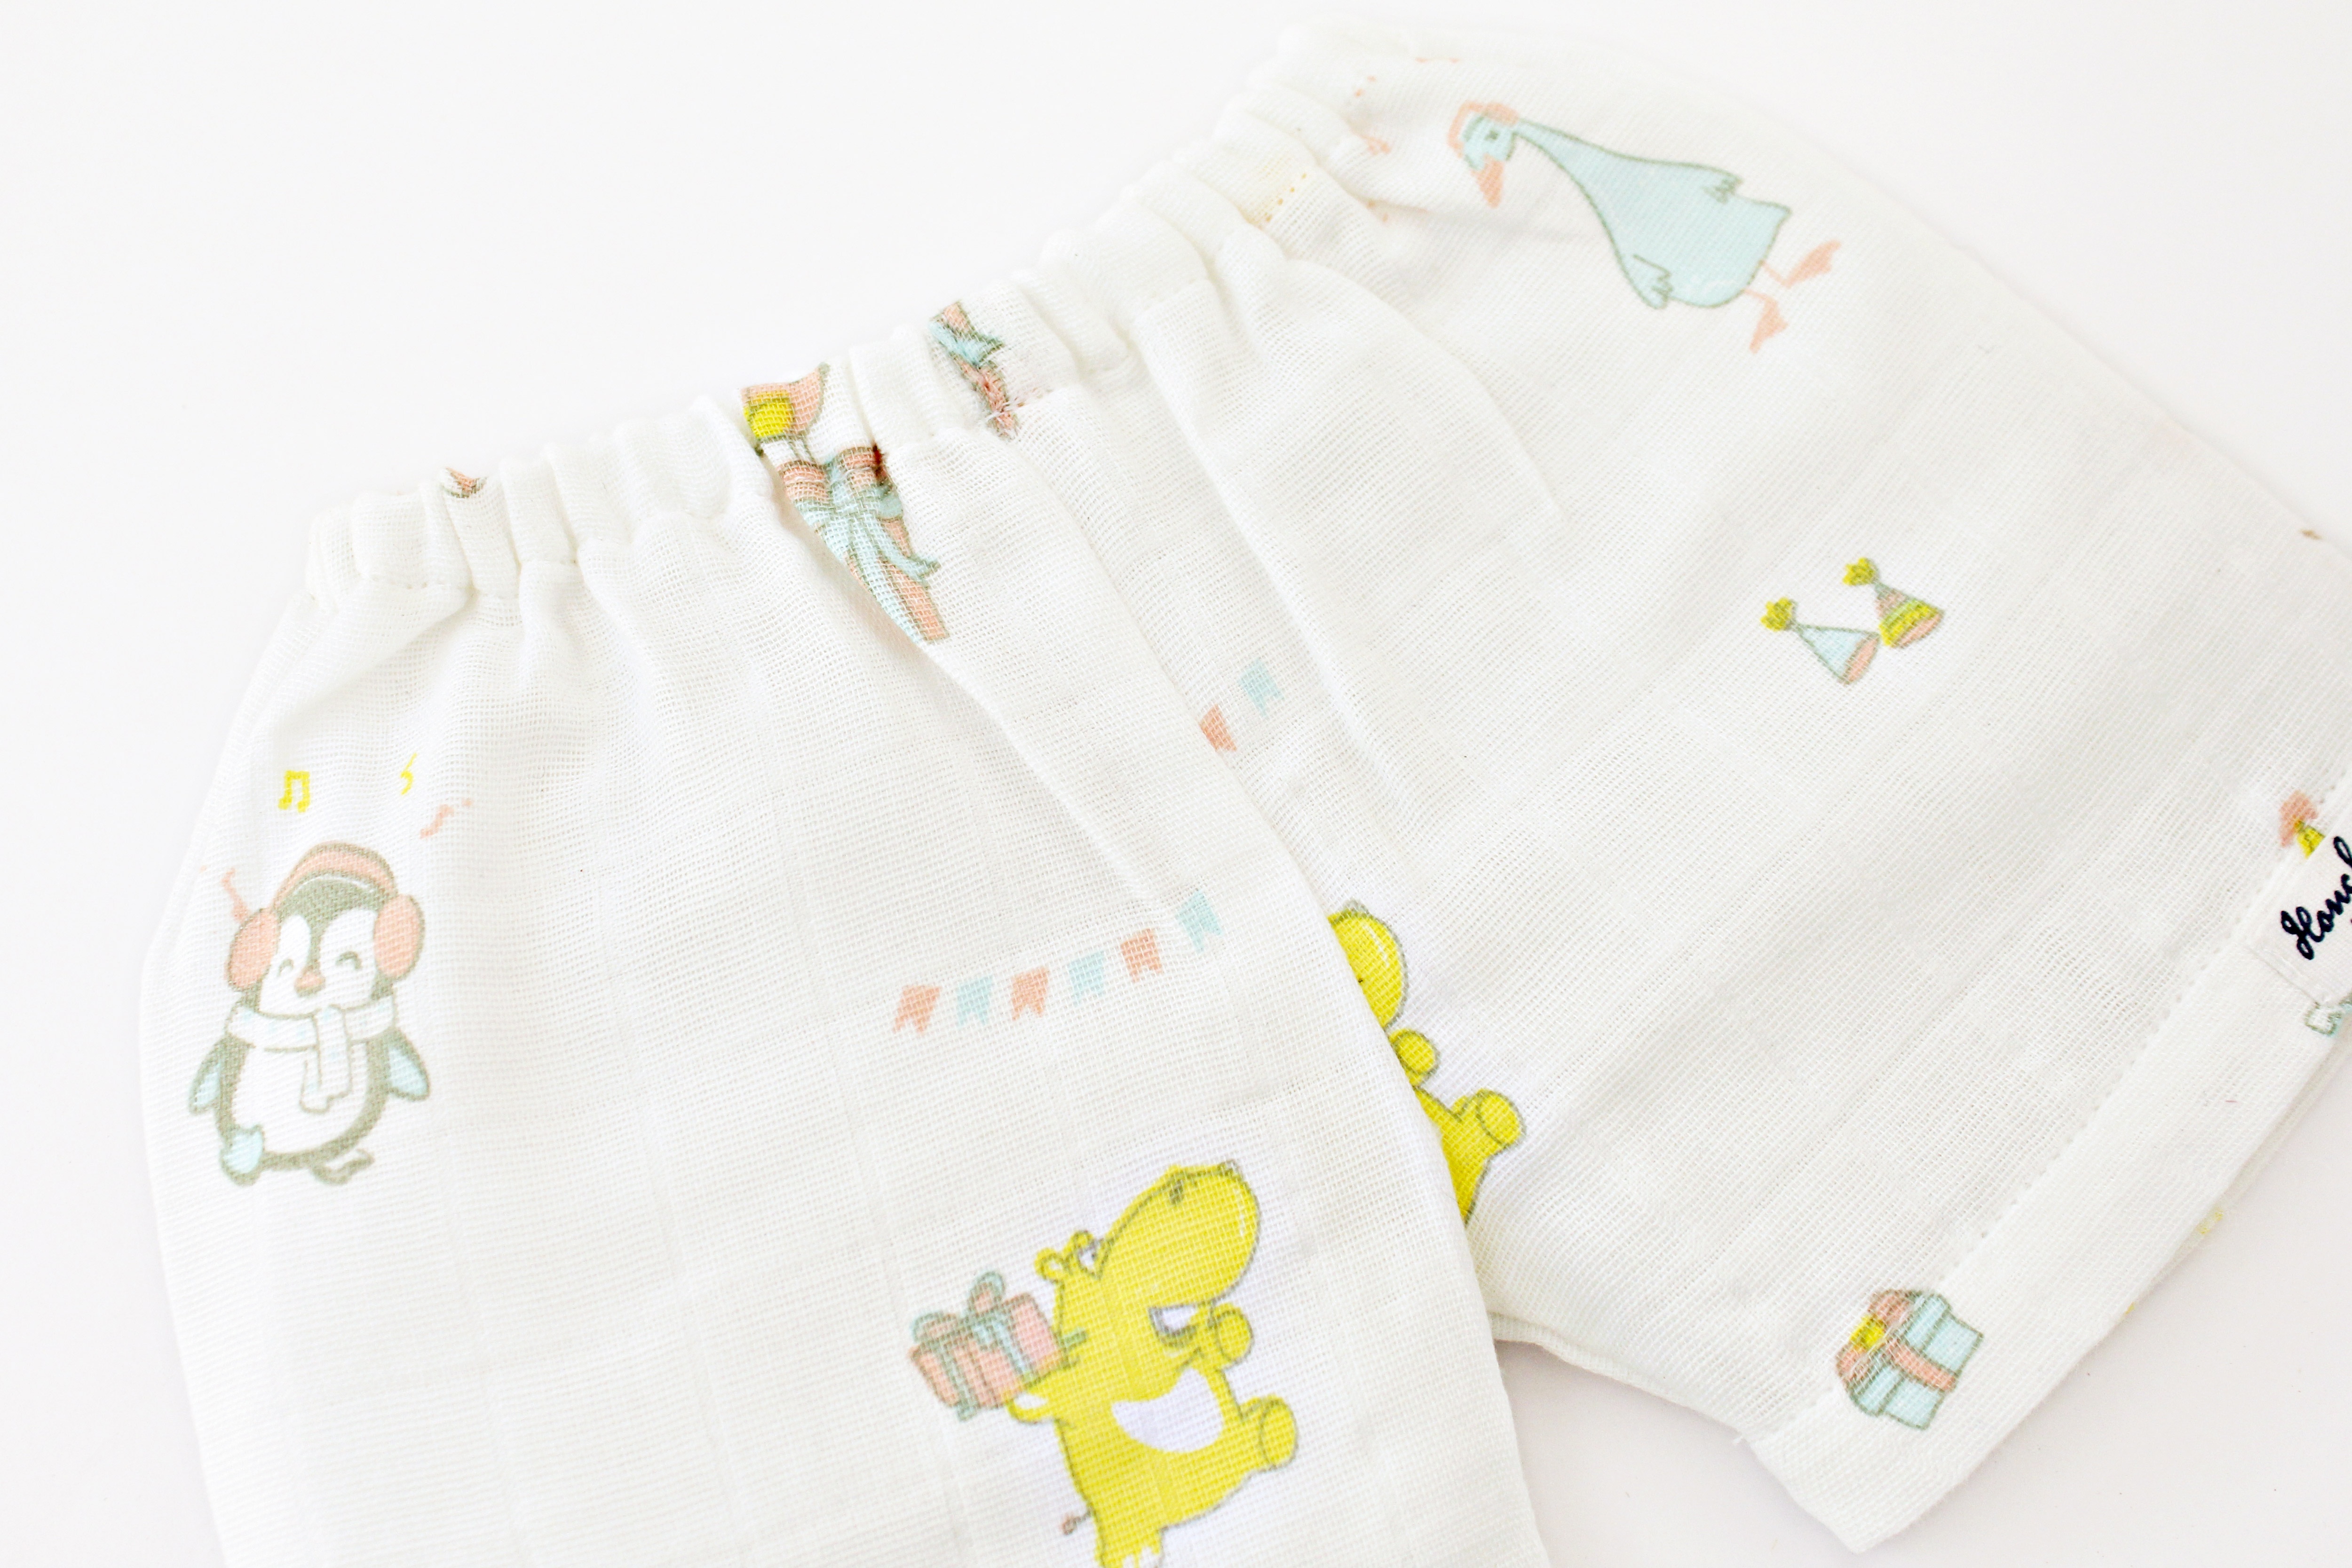 New Muslin Unisex Comfort Wear ( Jabals - 5 & Shorts - 5 ) new born to 3 years -Assorted Pack of 10